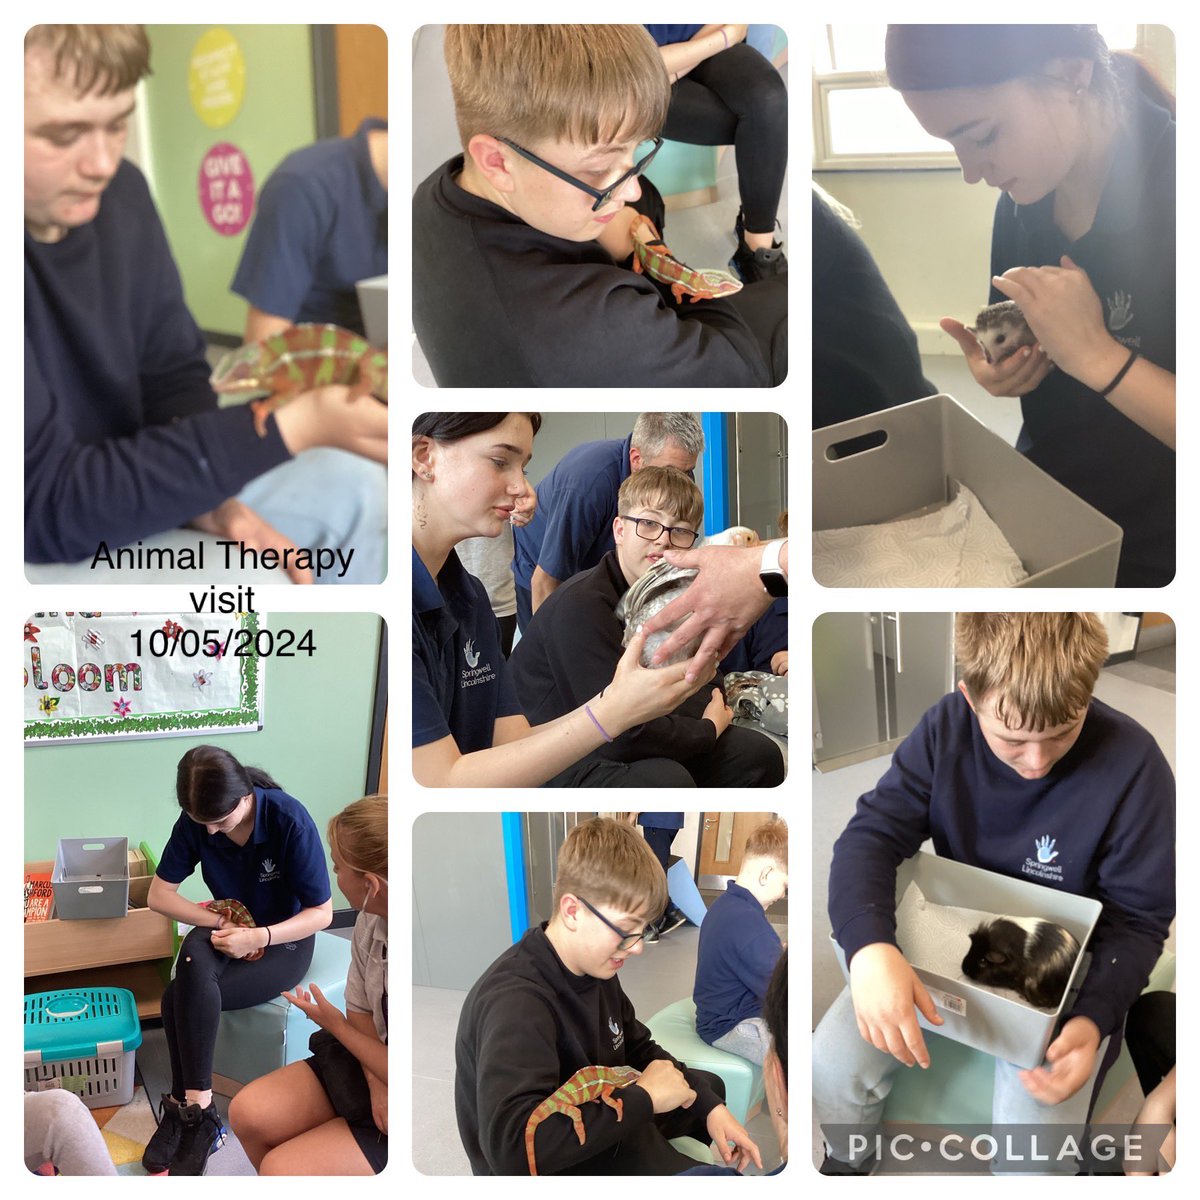 Enrichment today consisted of a CPR Workshop with lives and a visit from therapy animals. It’s was great to see everyone so engaged! #lifeskills #wemakeadifference